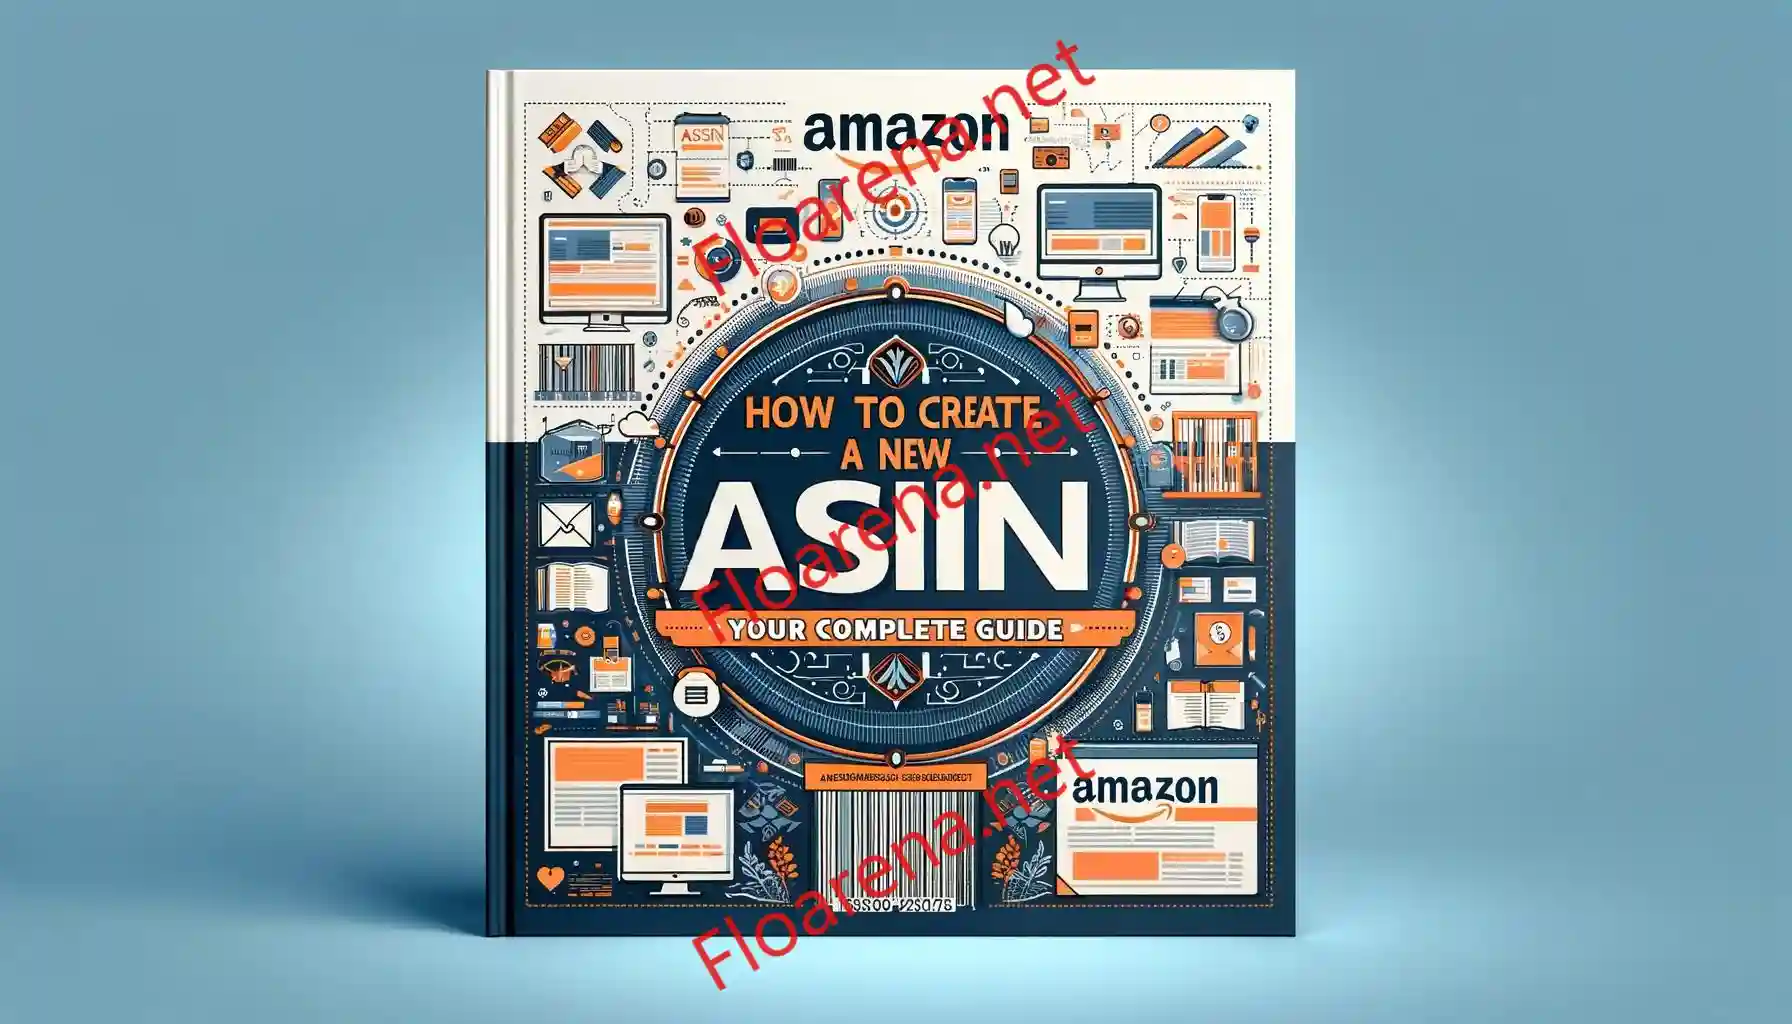 How to create a new Asin in Amazon